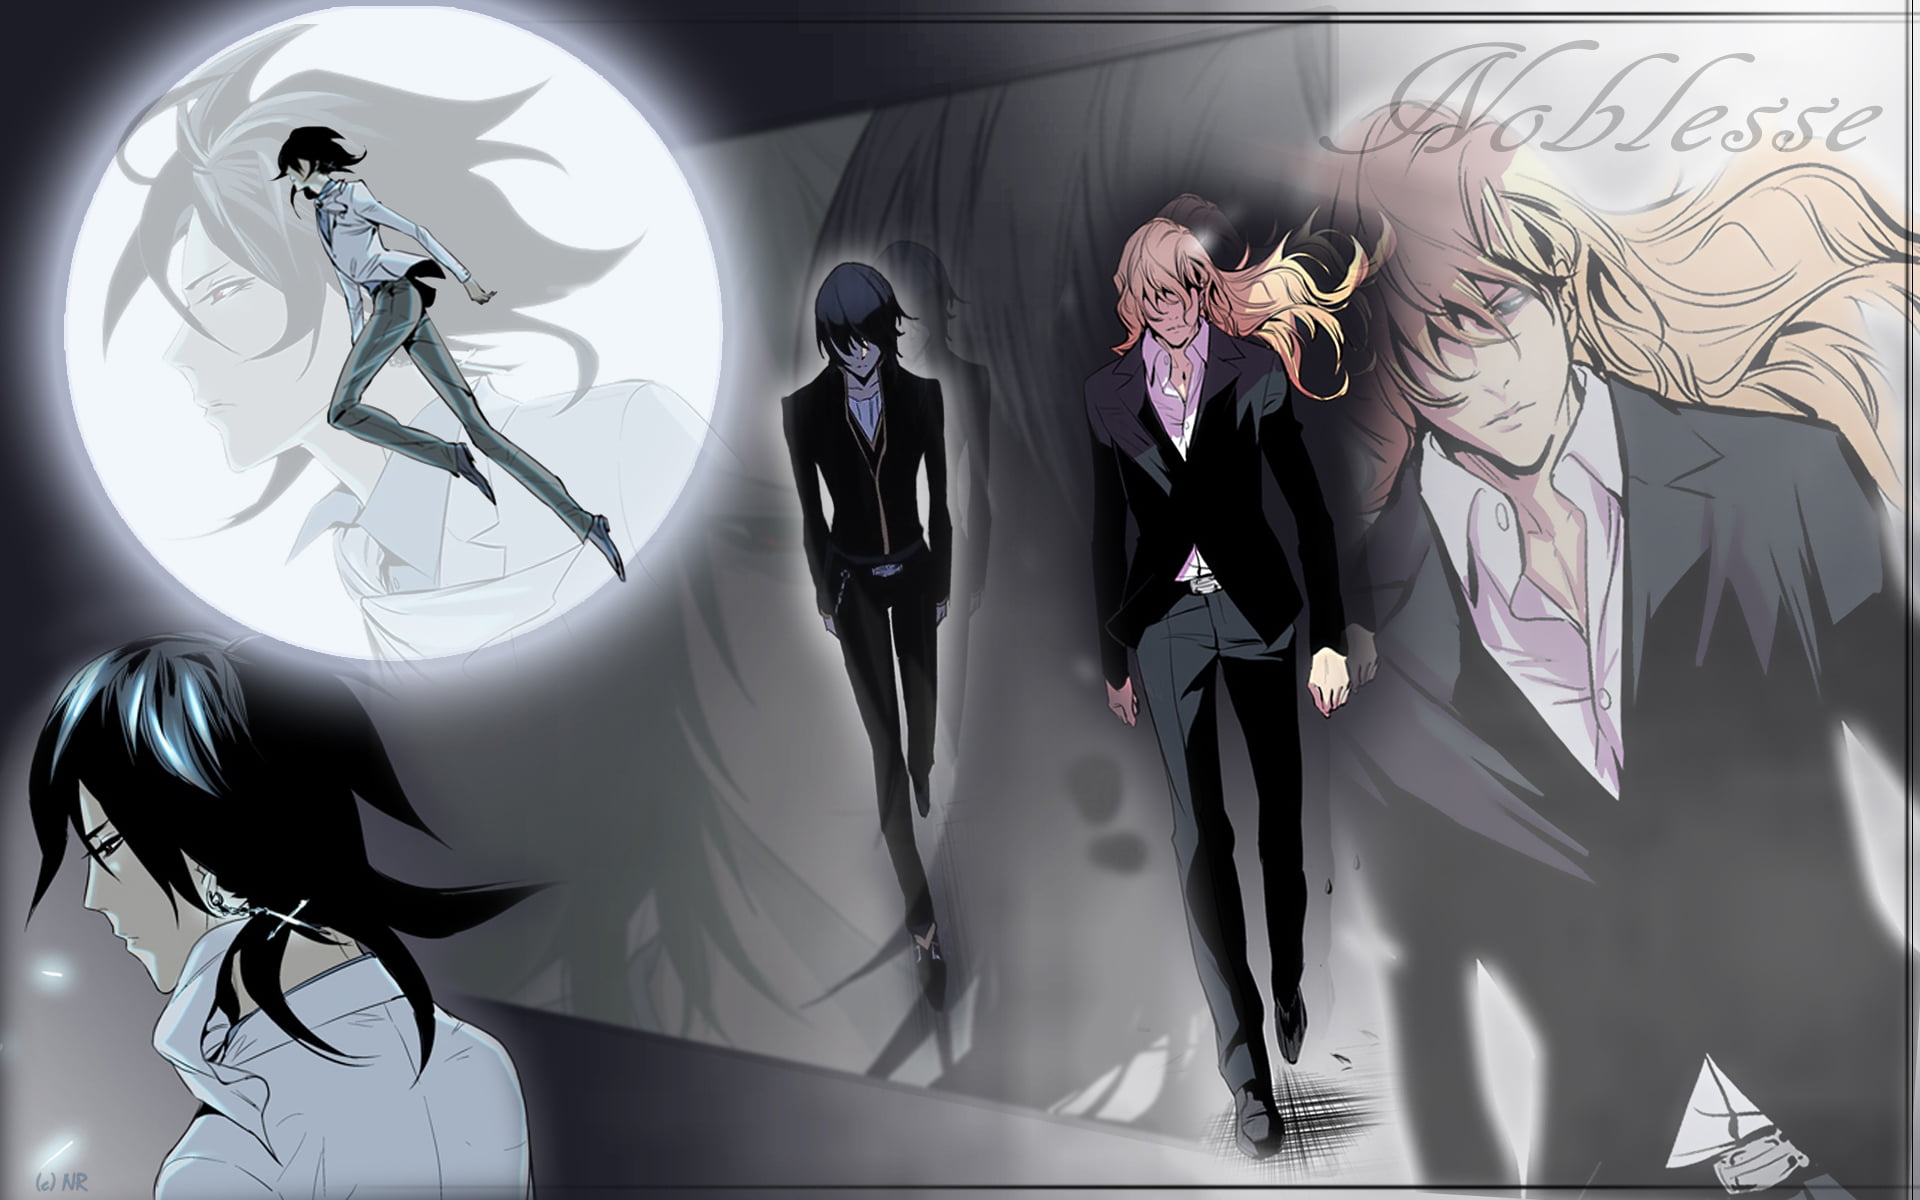 Noblesse Is NOT a Great Webtoon Adaptation, but Still Worth Watching